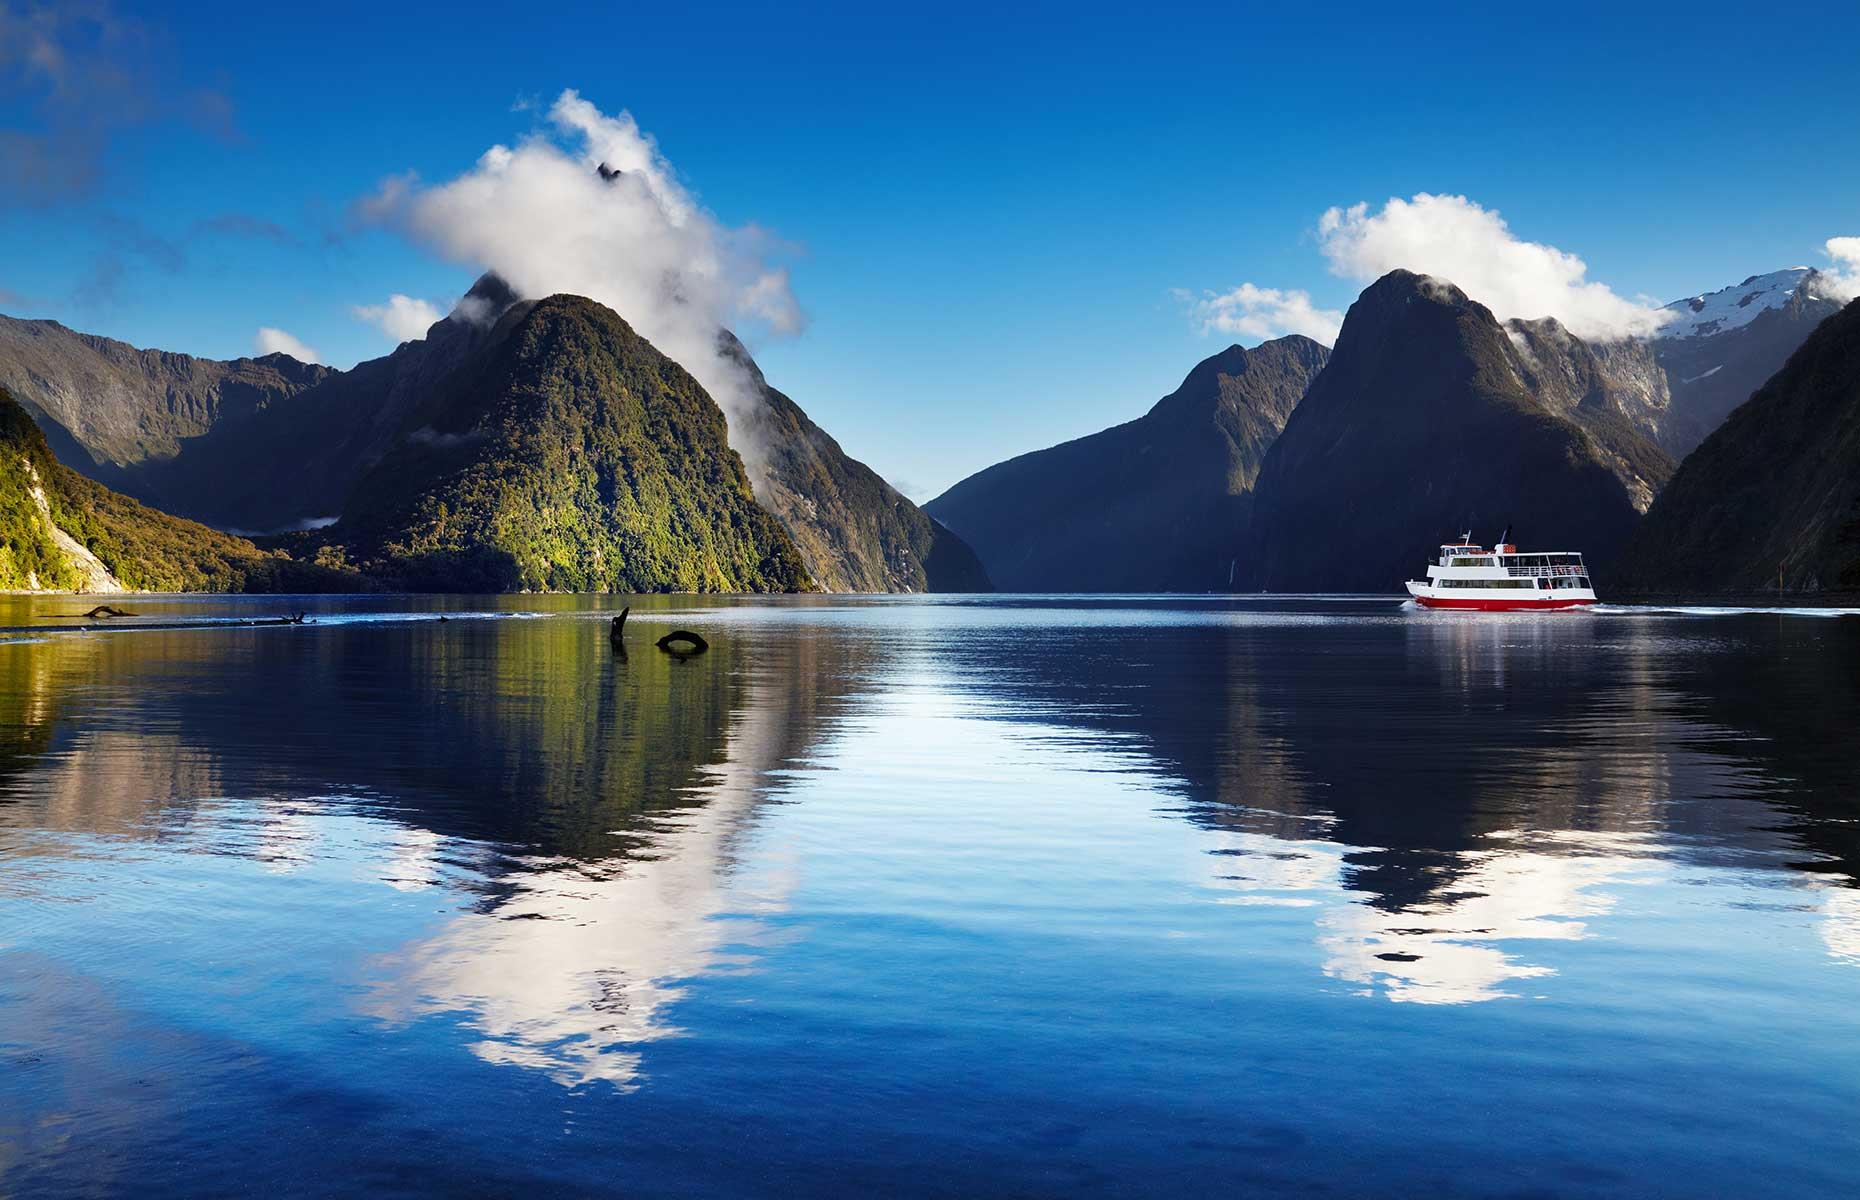 <p>South Island’s Fiordland National Park is one of the most pristine and spectacular places on the planet. The vast fiord known as Milford Sound, or Piopiotahi in the Māori language, has sheer rock walls rising 5,522 feet (1,683m) and a <a href="https://www.milford-sound.co.nz/milford-sound-cruises/">daytime or overnight cruise</a> gives a unique perspective.</p>